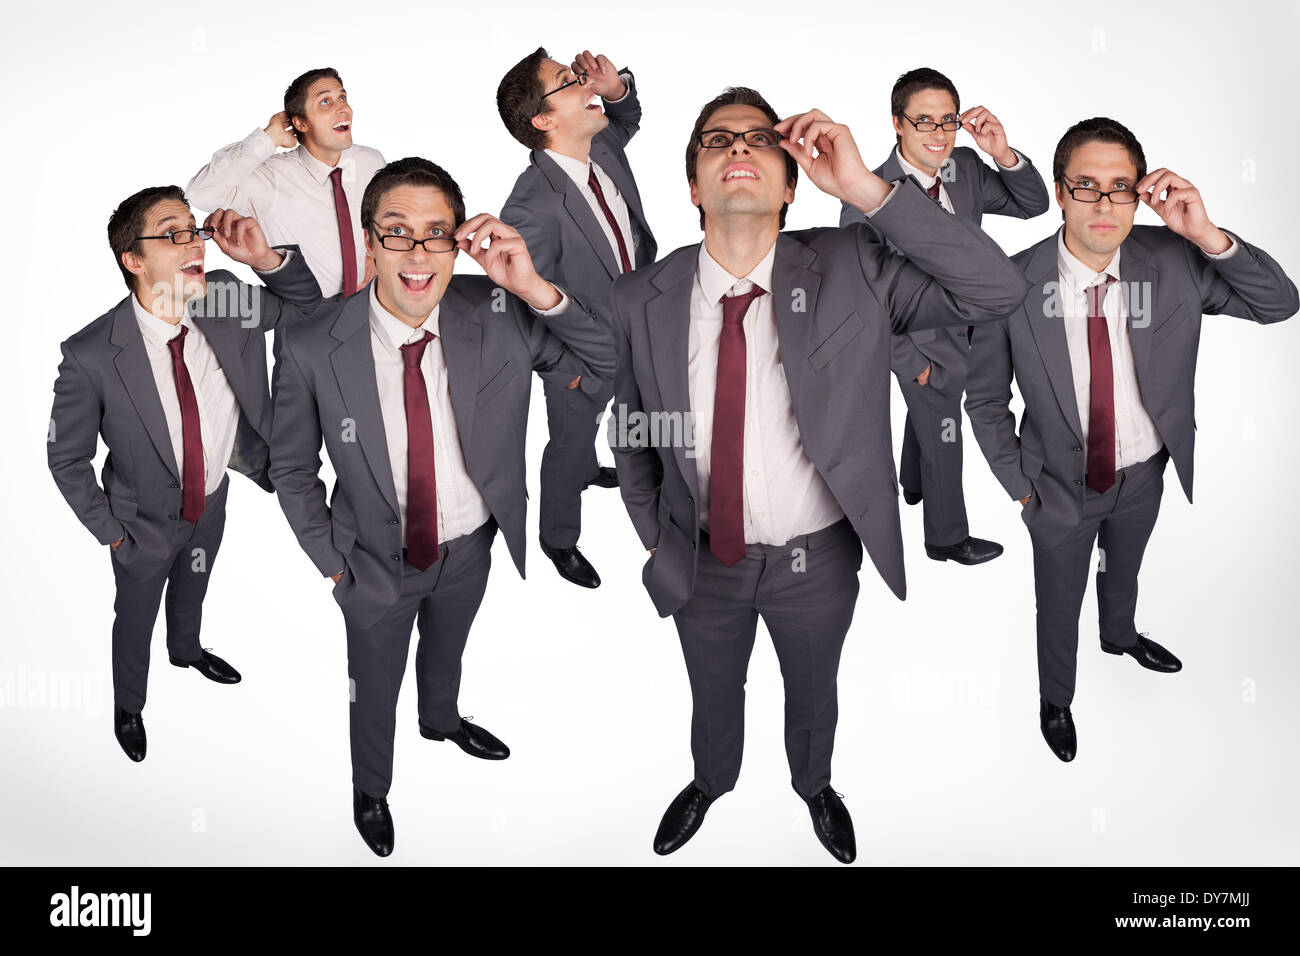 Varied emotions of businessman Stock Photo